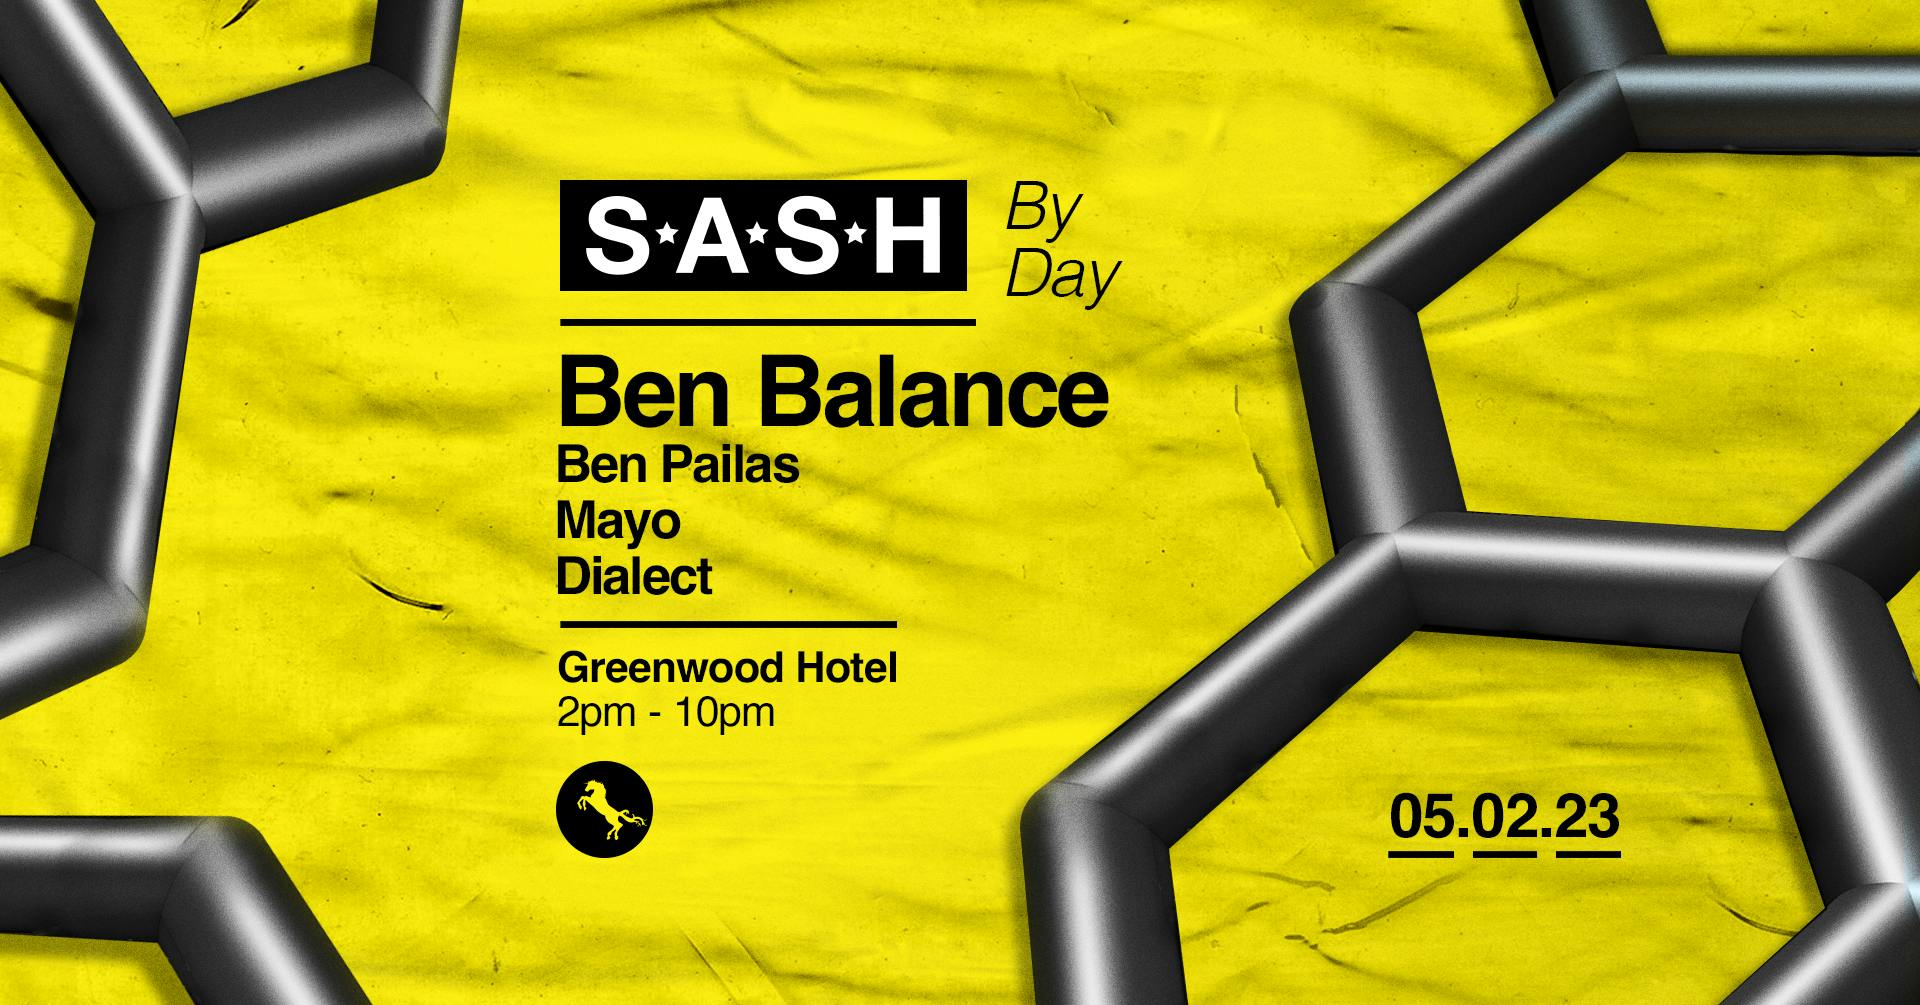 ★ S.A.S.H By Day ★ Ben Balance ★ 5th February ★